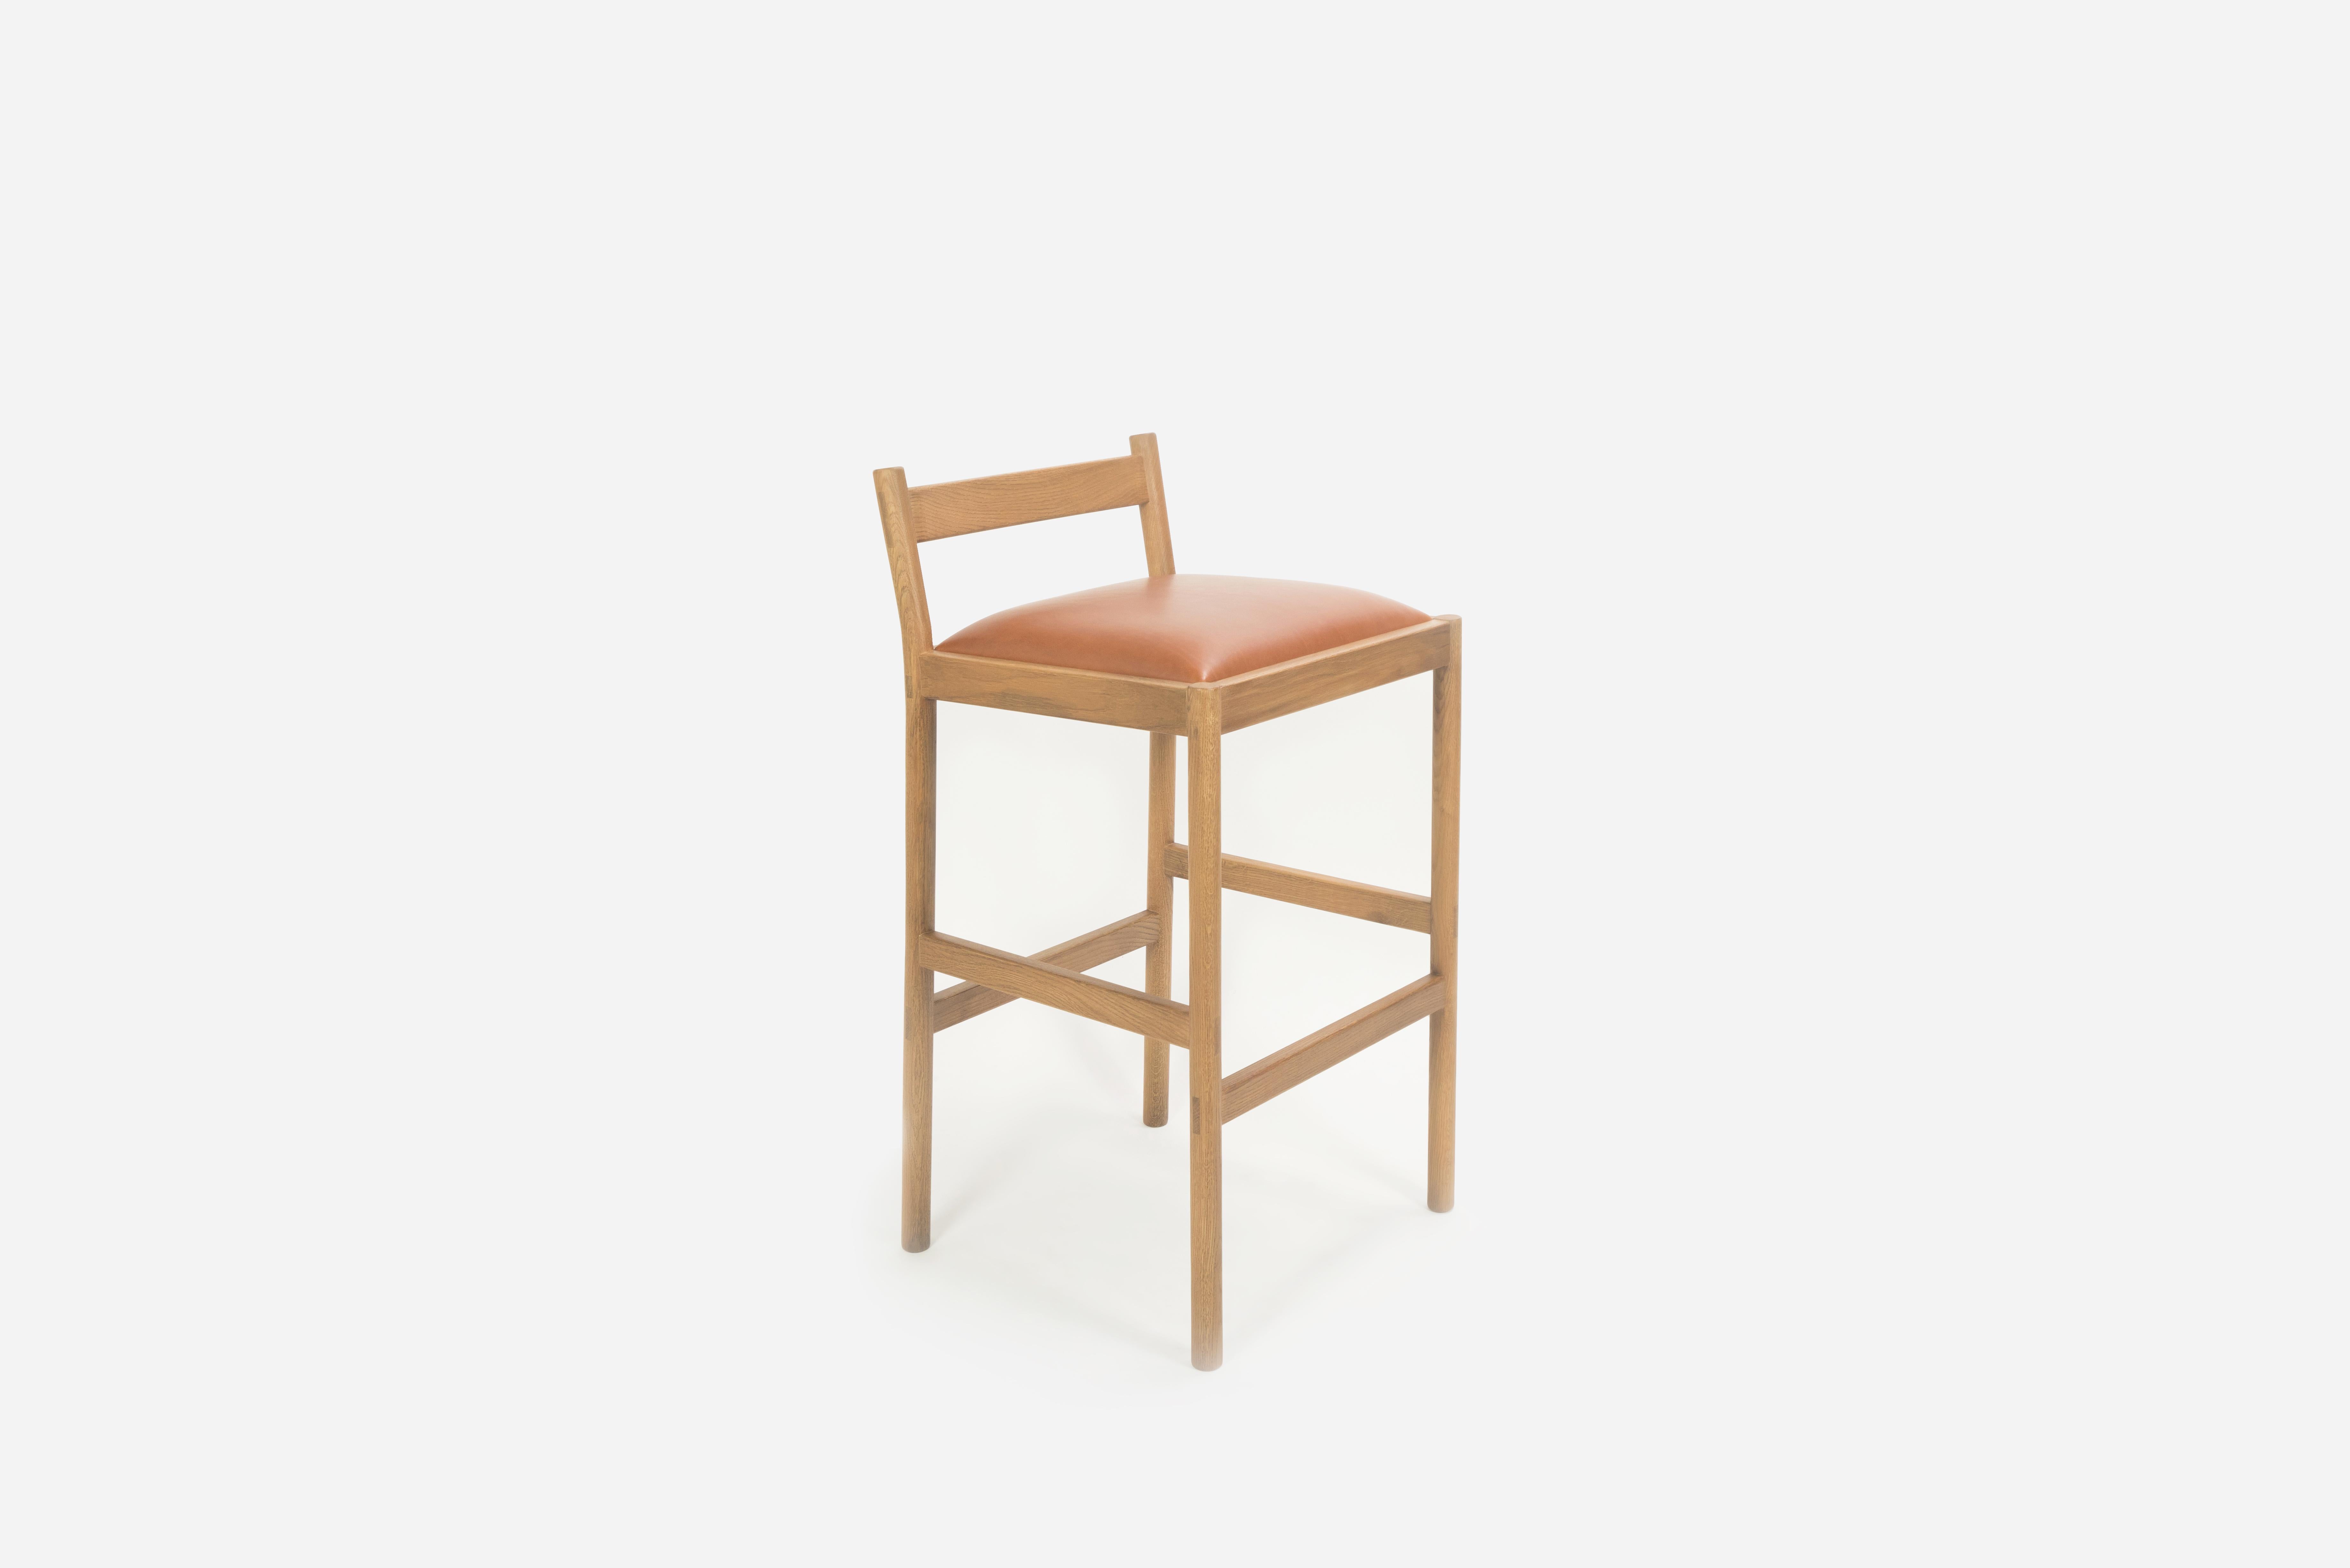 Chinese Carob Counter Stool by Sun at Six, Sienna Minimalist Stool in Oak Wood For Sale